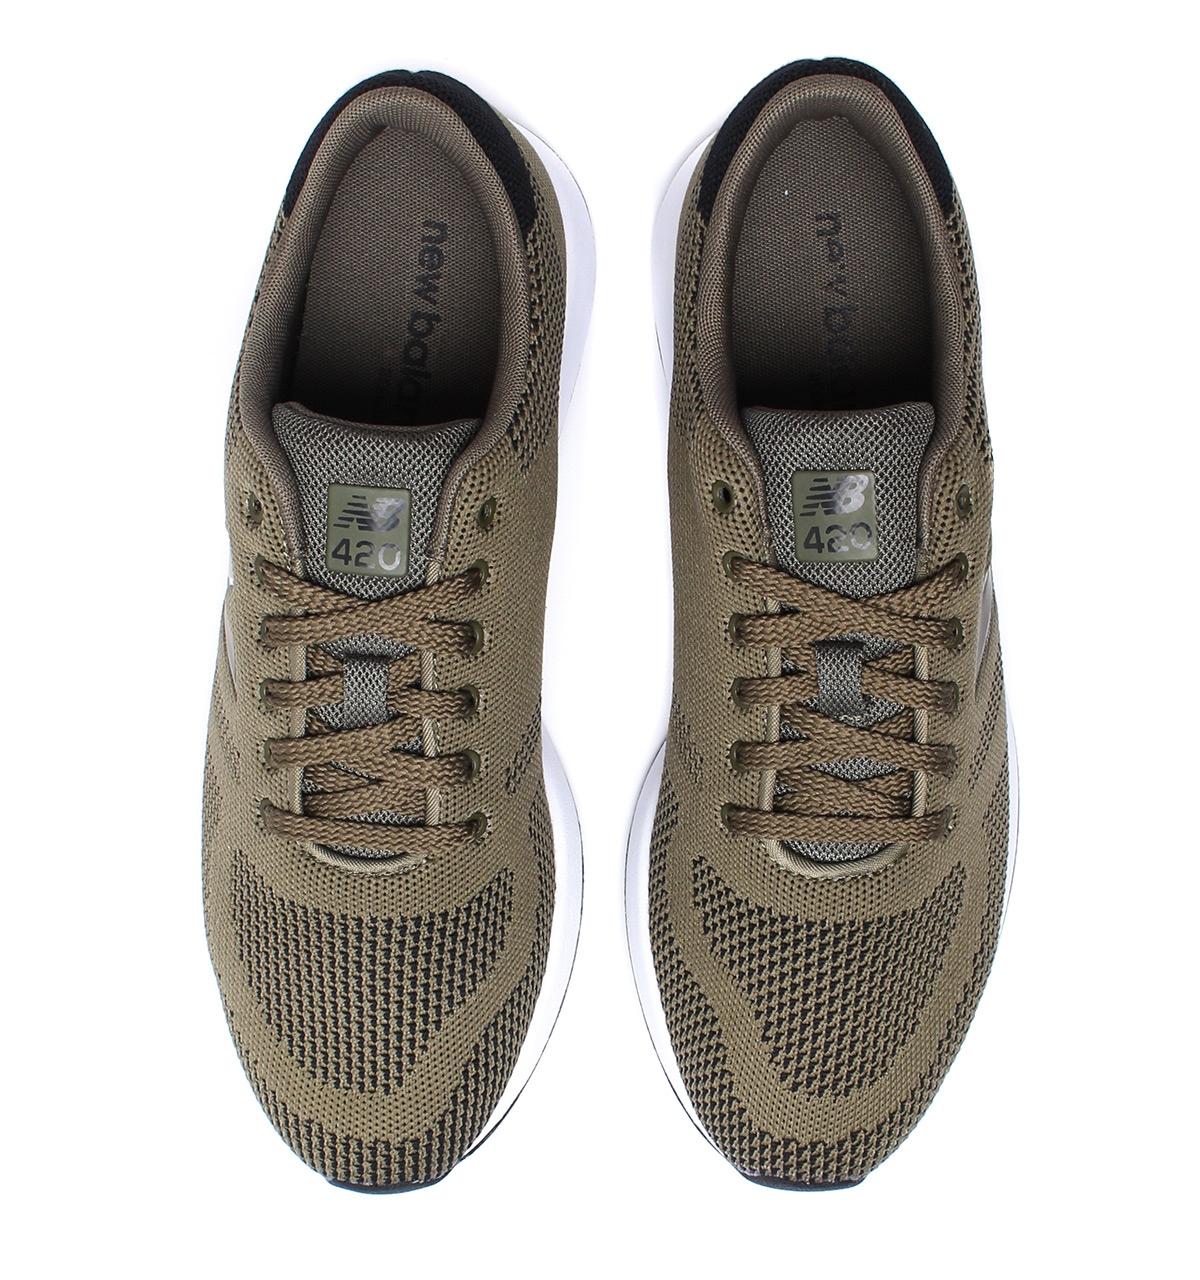 New Balance Rubber 420 Olive Green Trainers for Men - Lyst